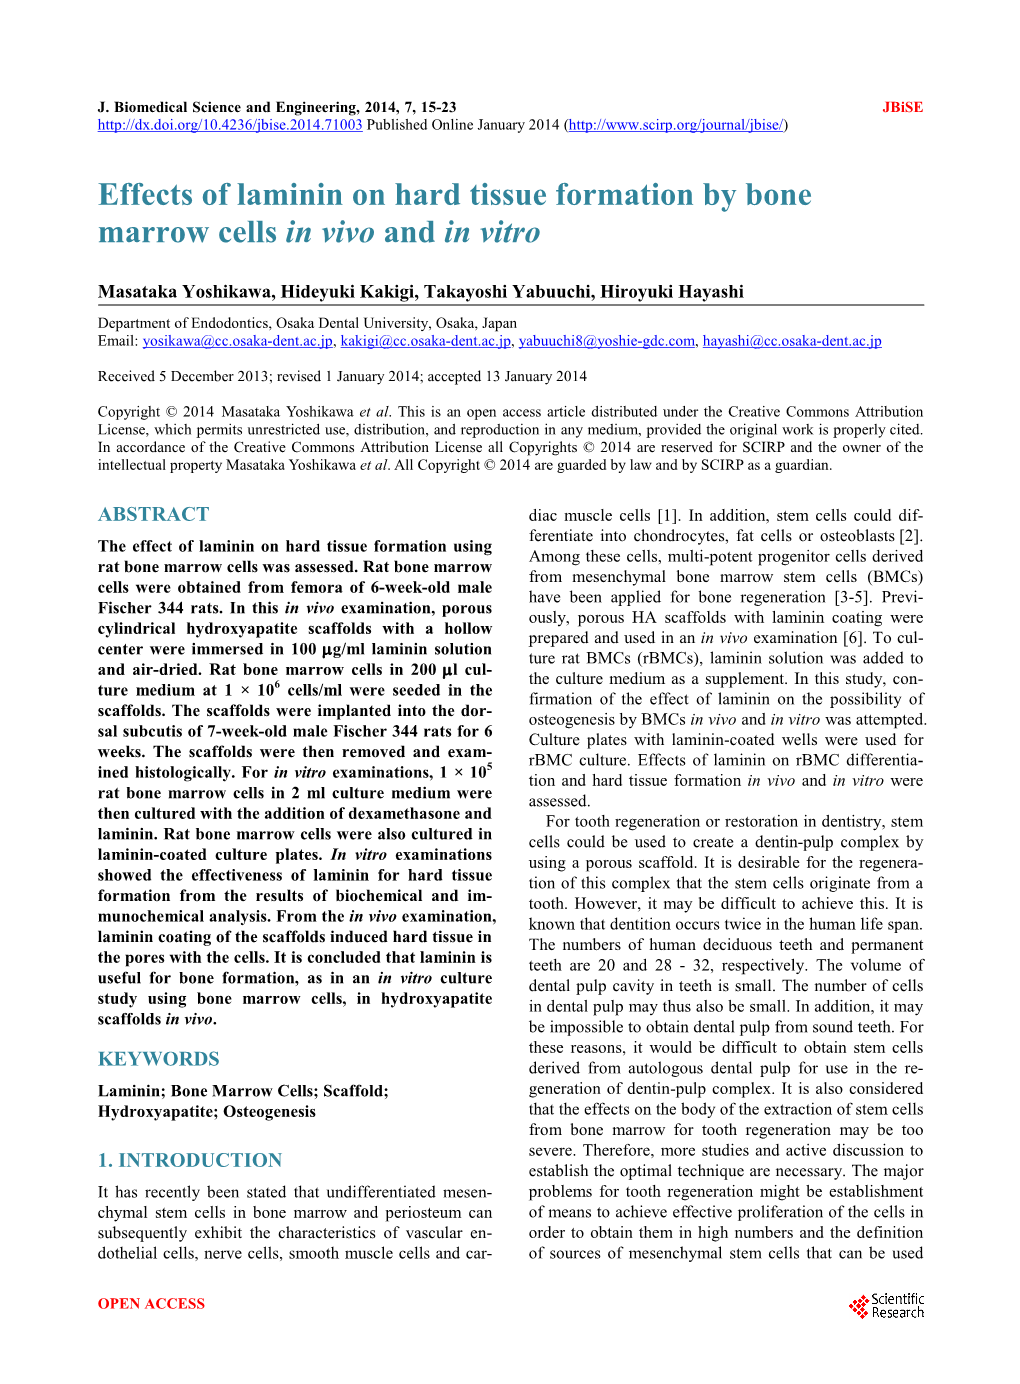 Effects of Laminin on Hard Tissue Formation by Bone Marrow Cells in Vivo and in Vitro